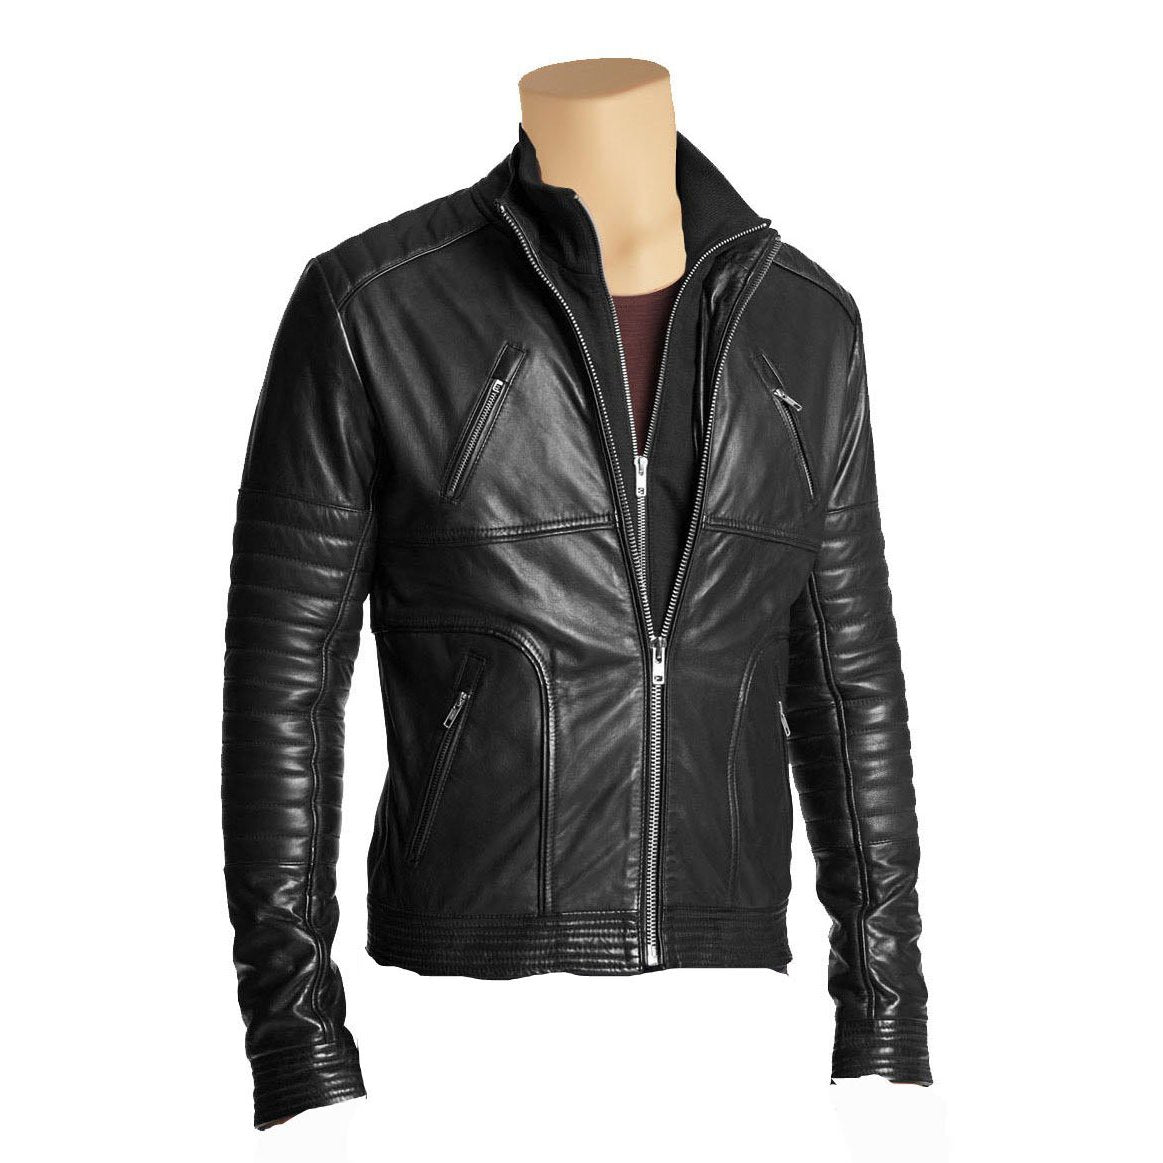 Men's leather jacket with straight zip up collar